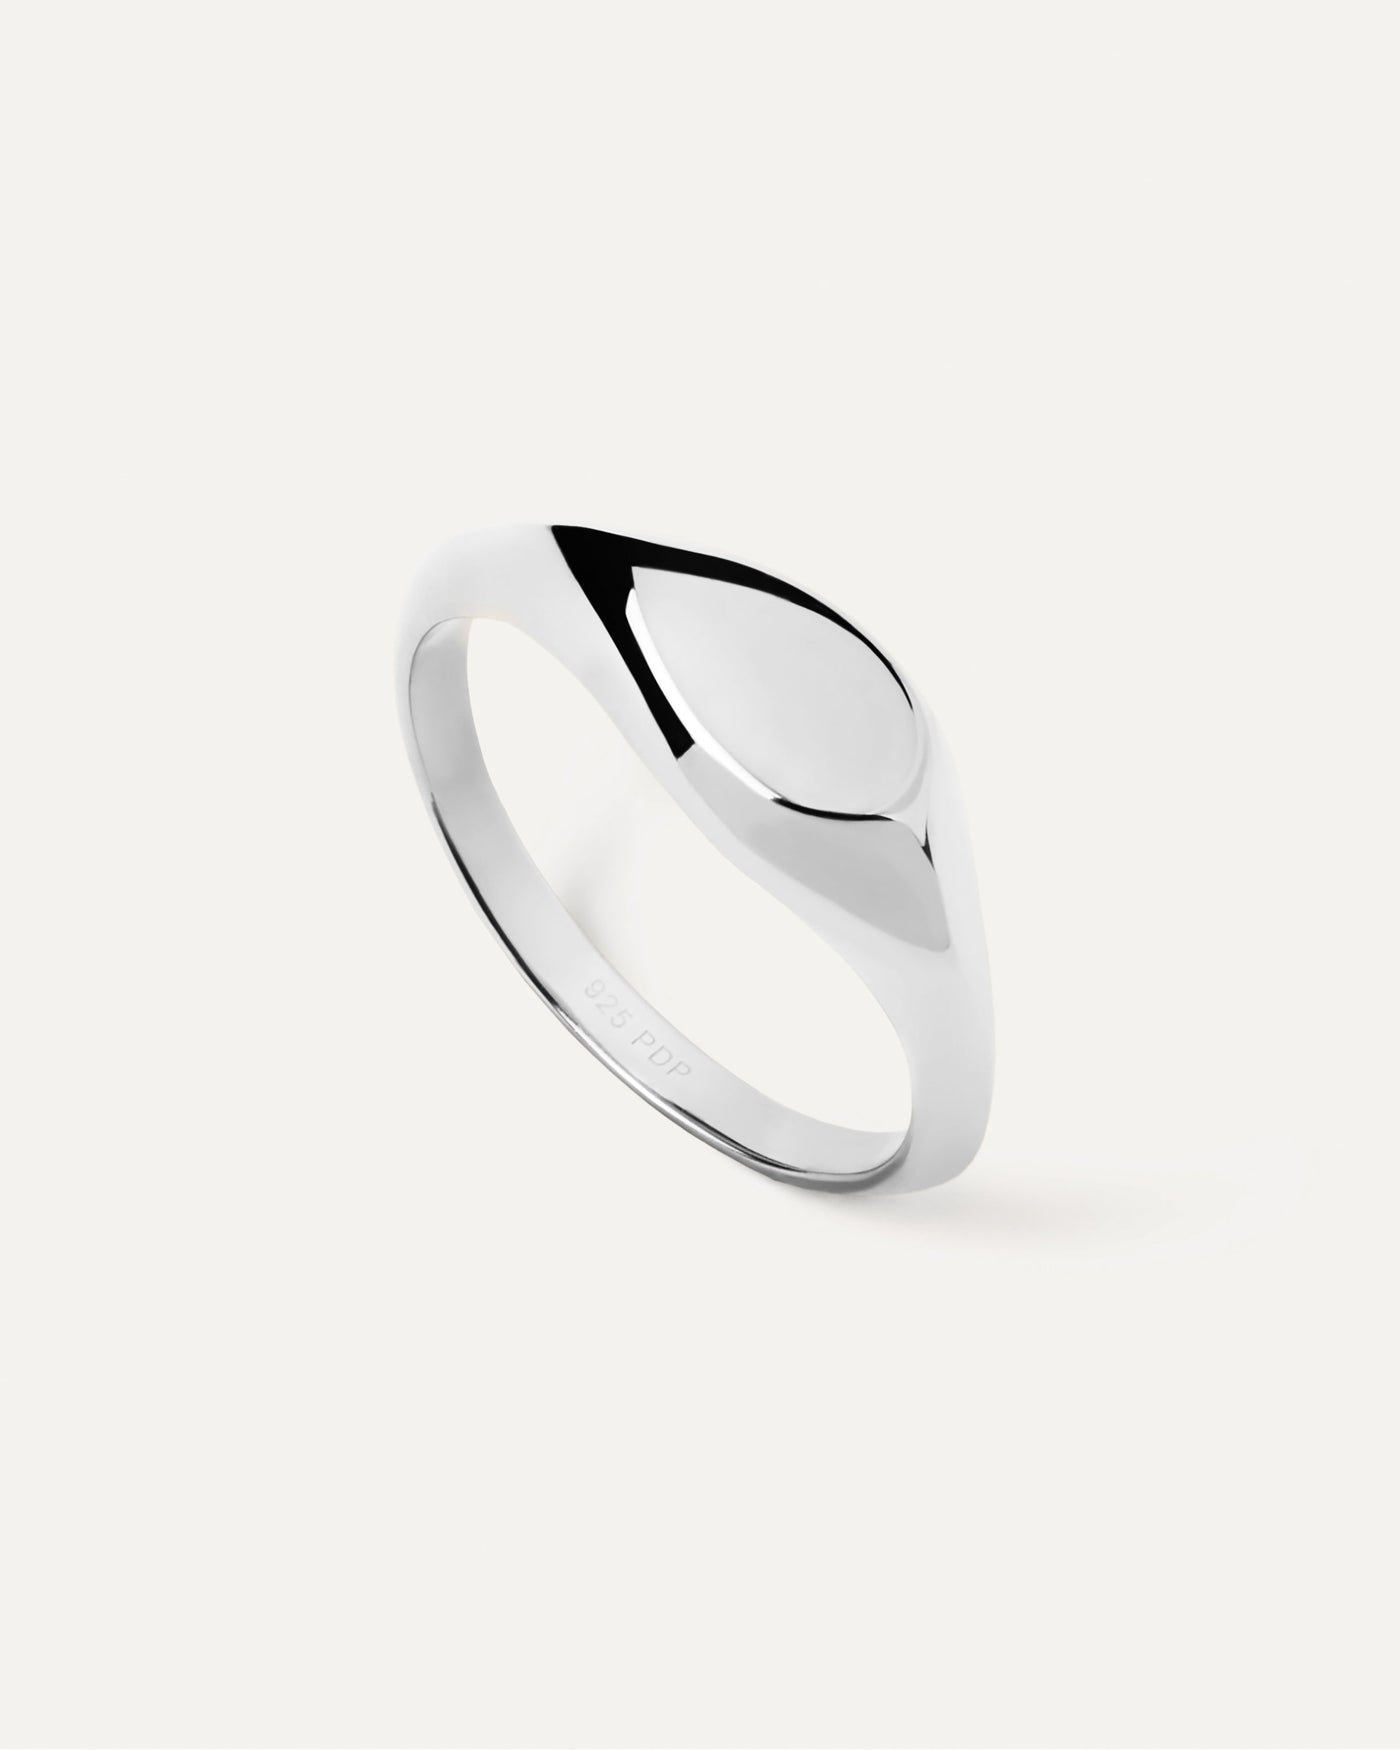 2023 Selection | Devi Stamp Silver Ring. Sterling silver signet ring with pear shape plain design. Get the latest arrival from PDPAOLA. Place your order safely and get this Best Seller. Free Shipping.